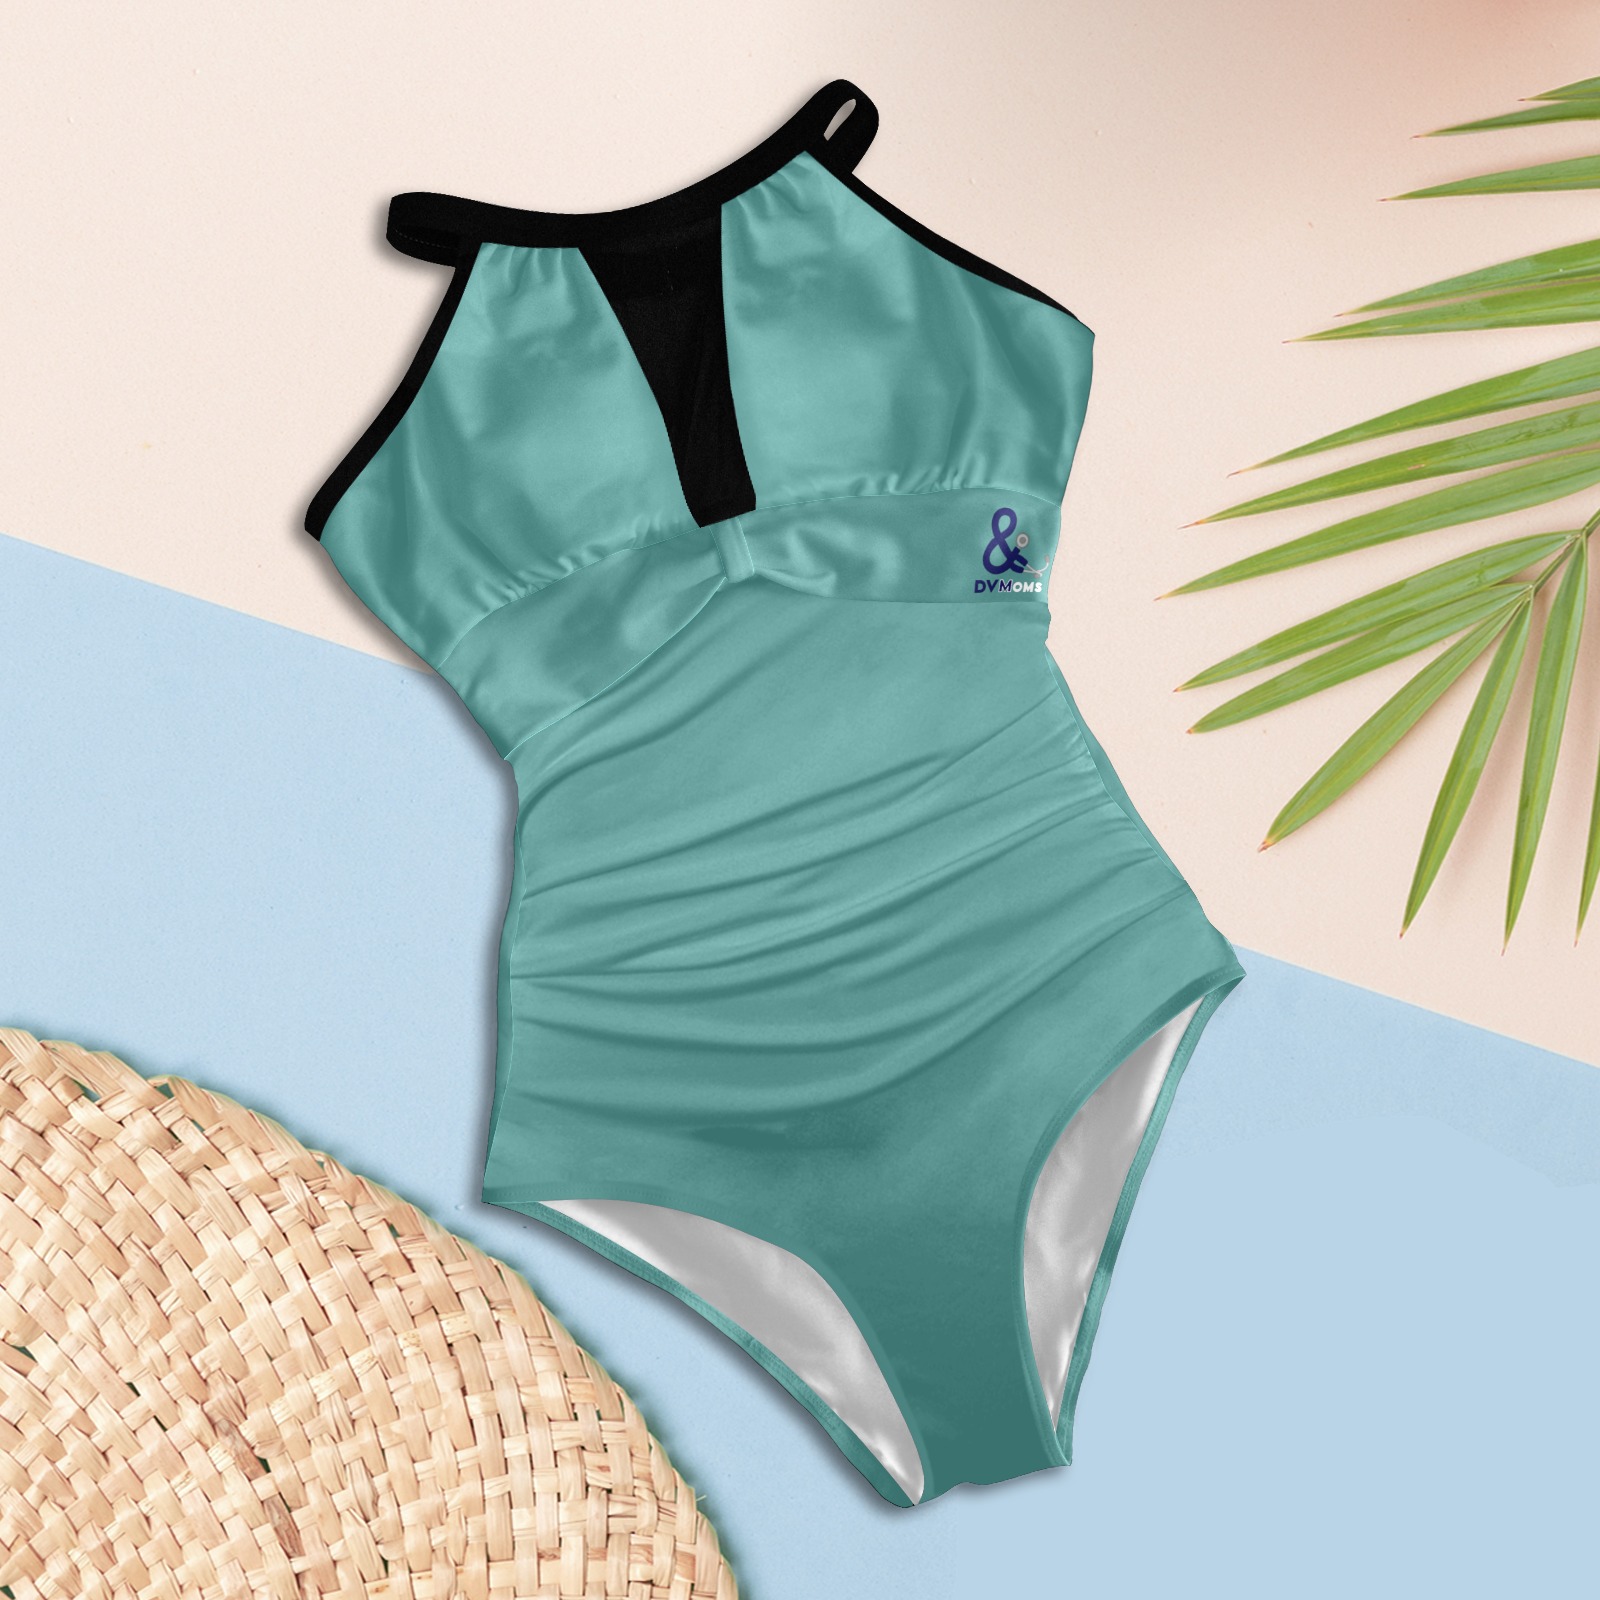 The suit darker teal logo on side Women's High Neck Plunge Mesh Ruched Swimsuit (S43)